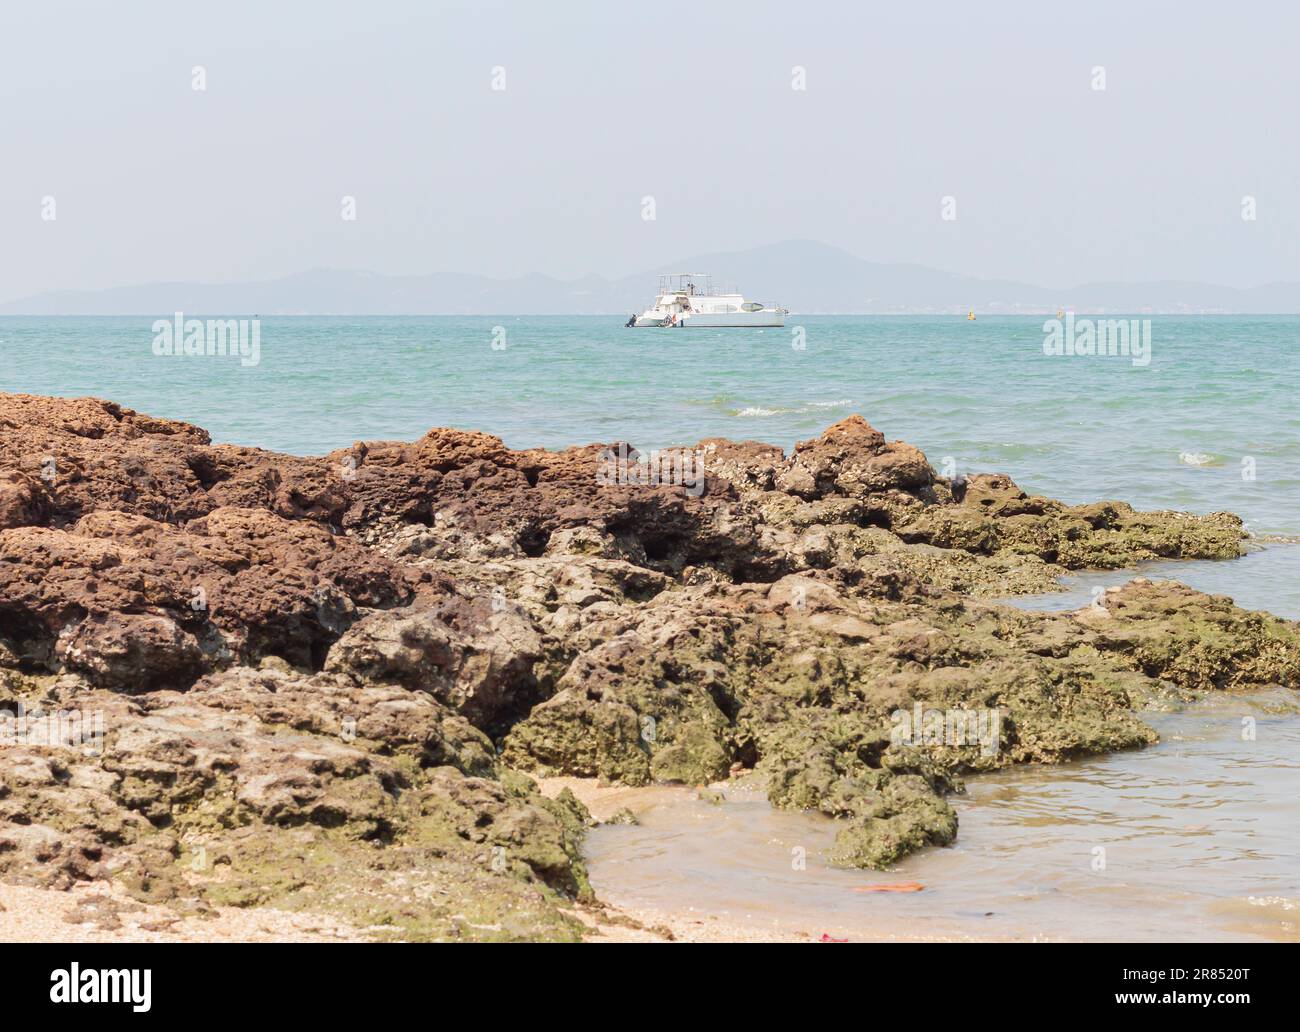 contemporary yacht, Sand, rocks in haze, sea.Seascape. tourist boat floats on waves to island. Mountains on horizon. In foreground are large stones. s Stock Photo